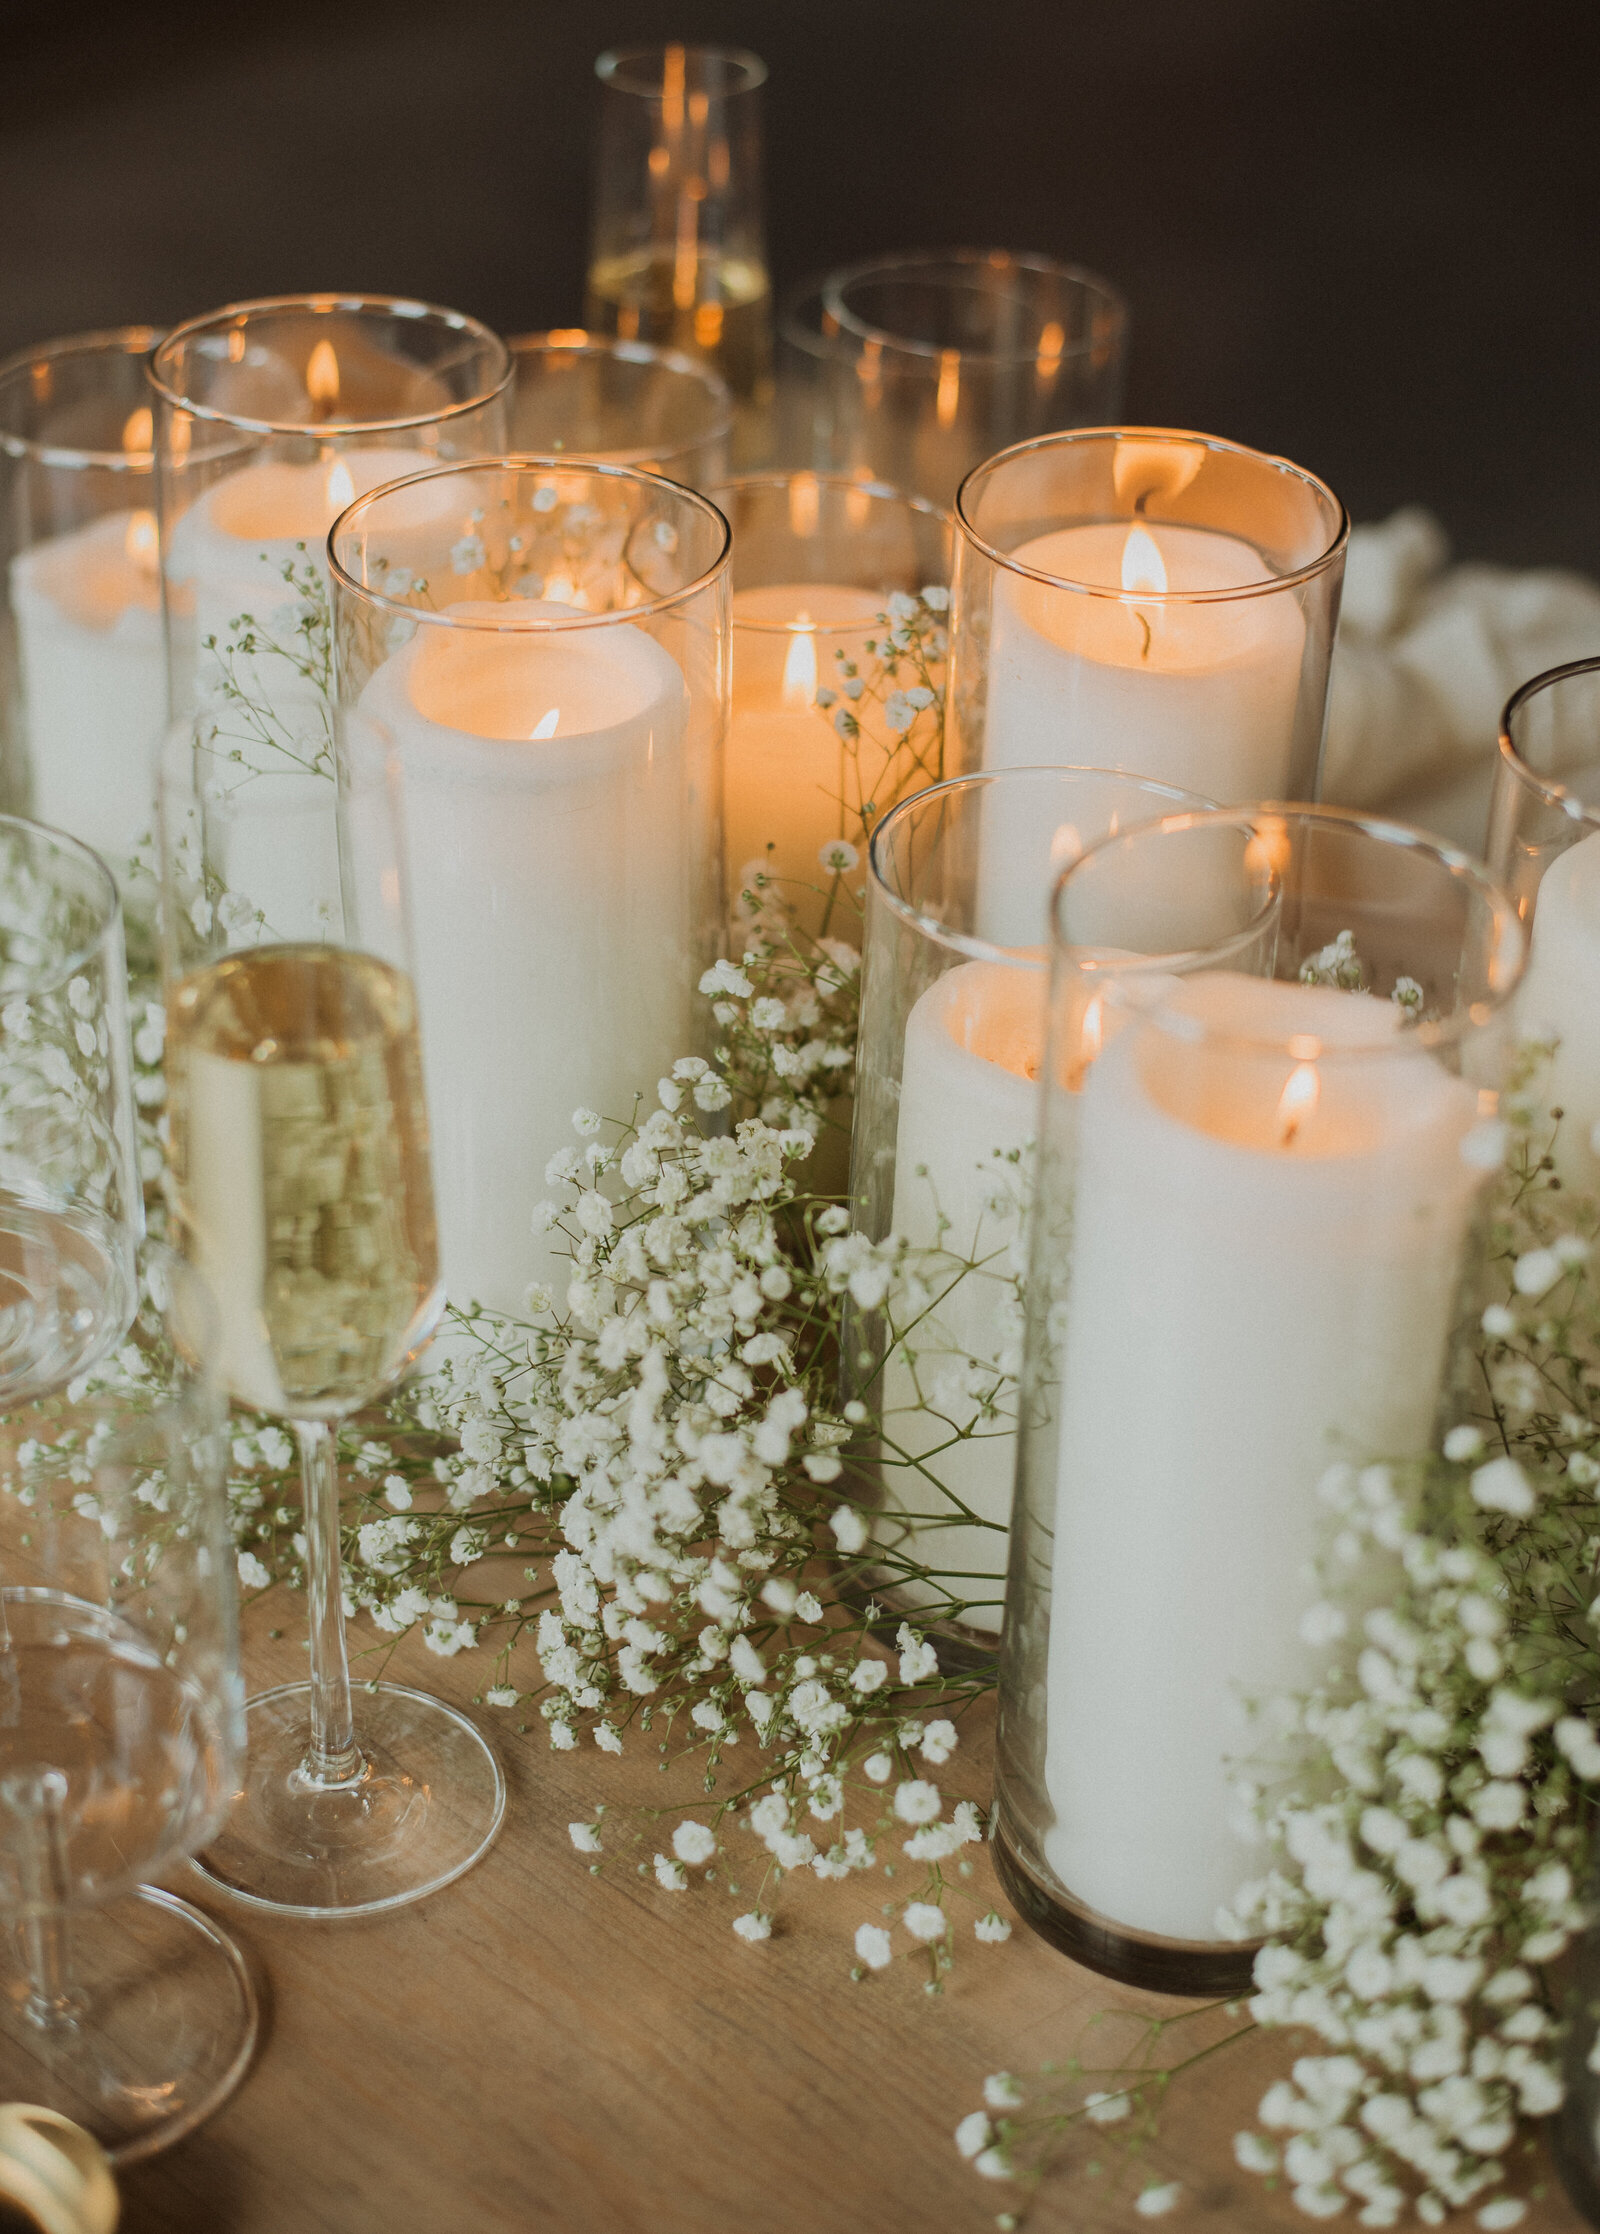 White candles burning on table